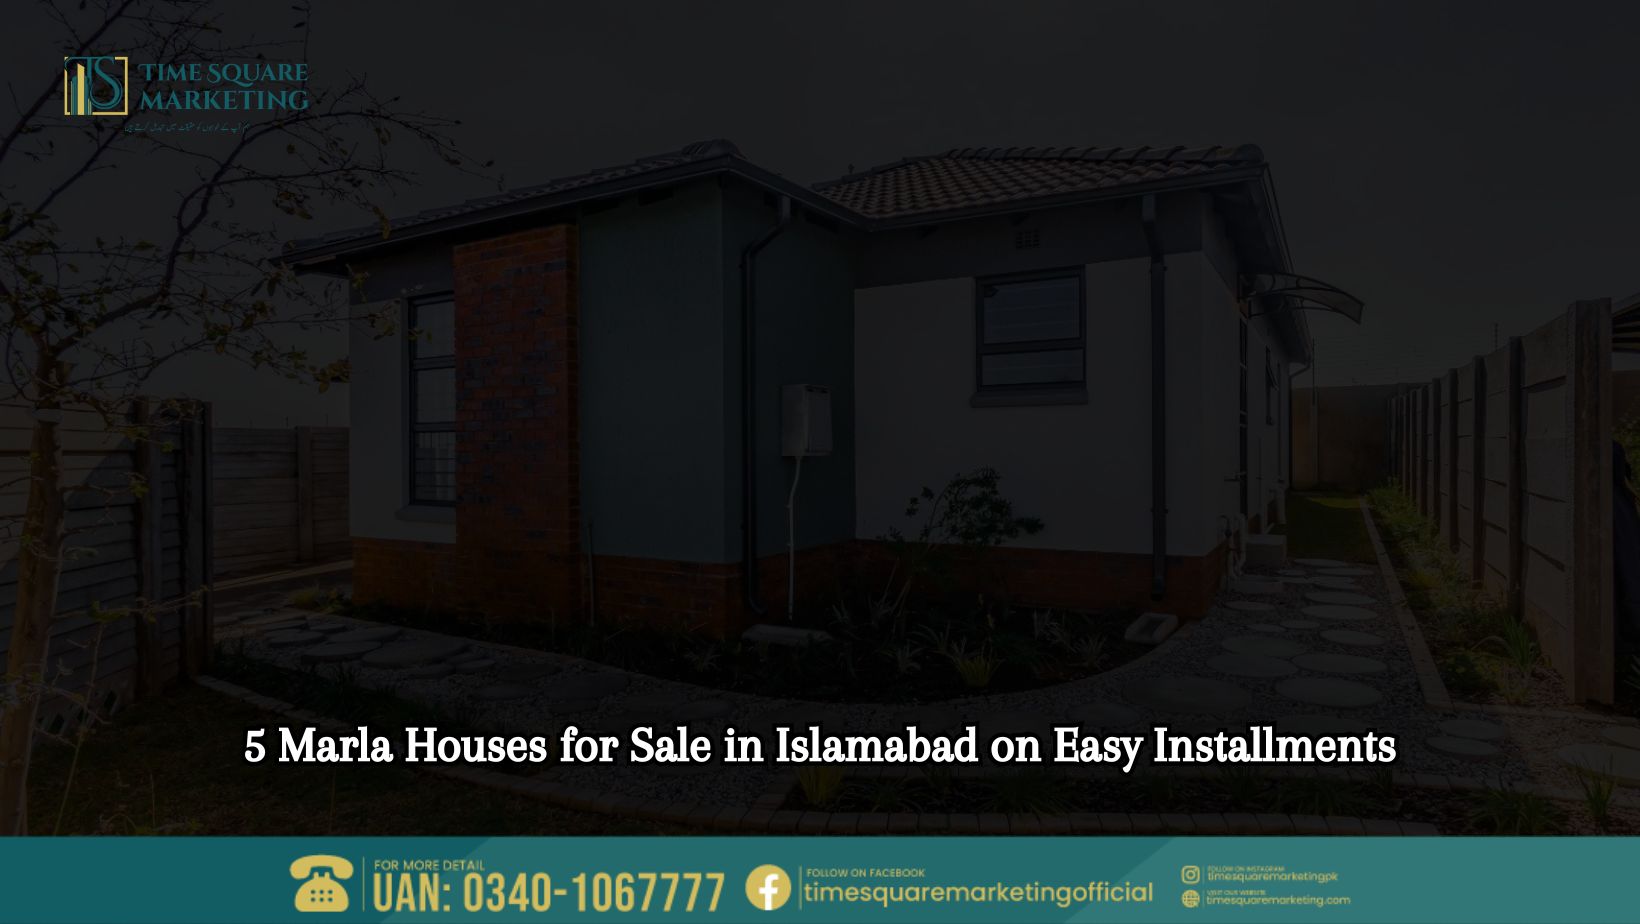 5 Marla Houses for Sale in Islamabad on Easy Installments